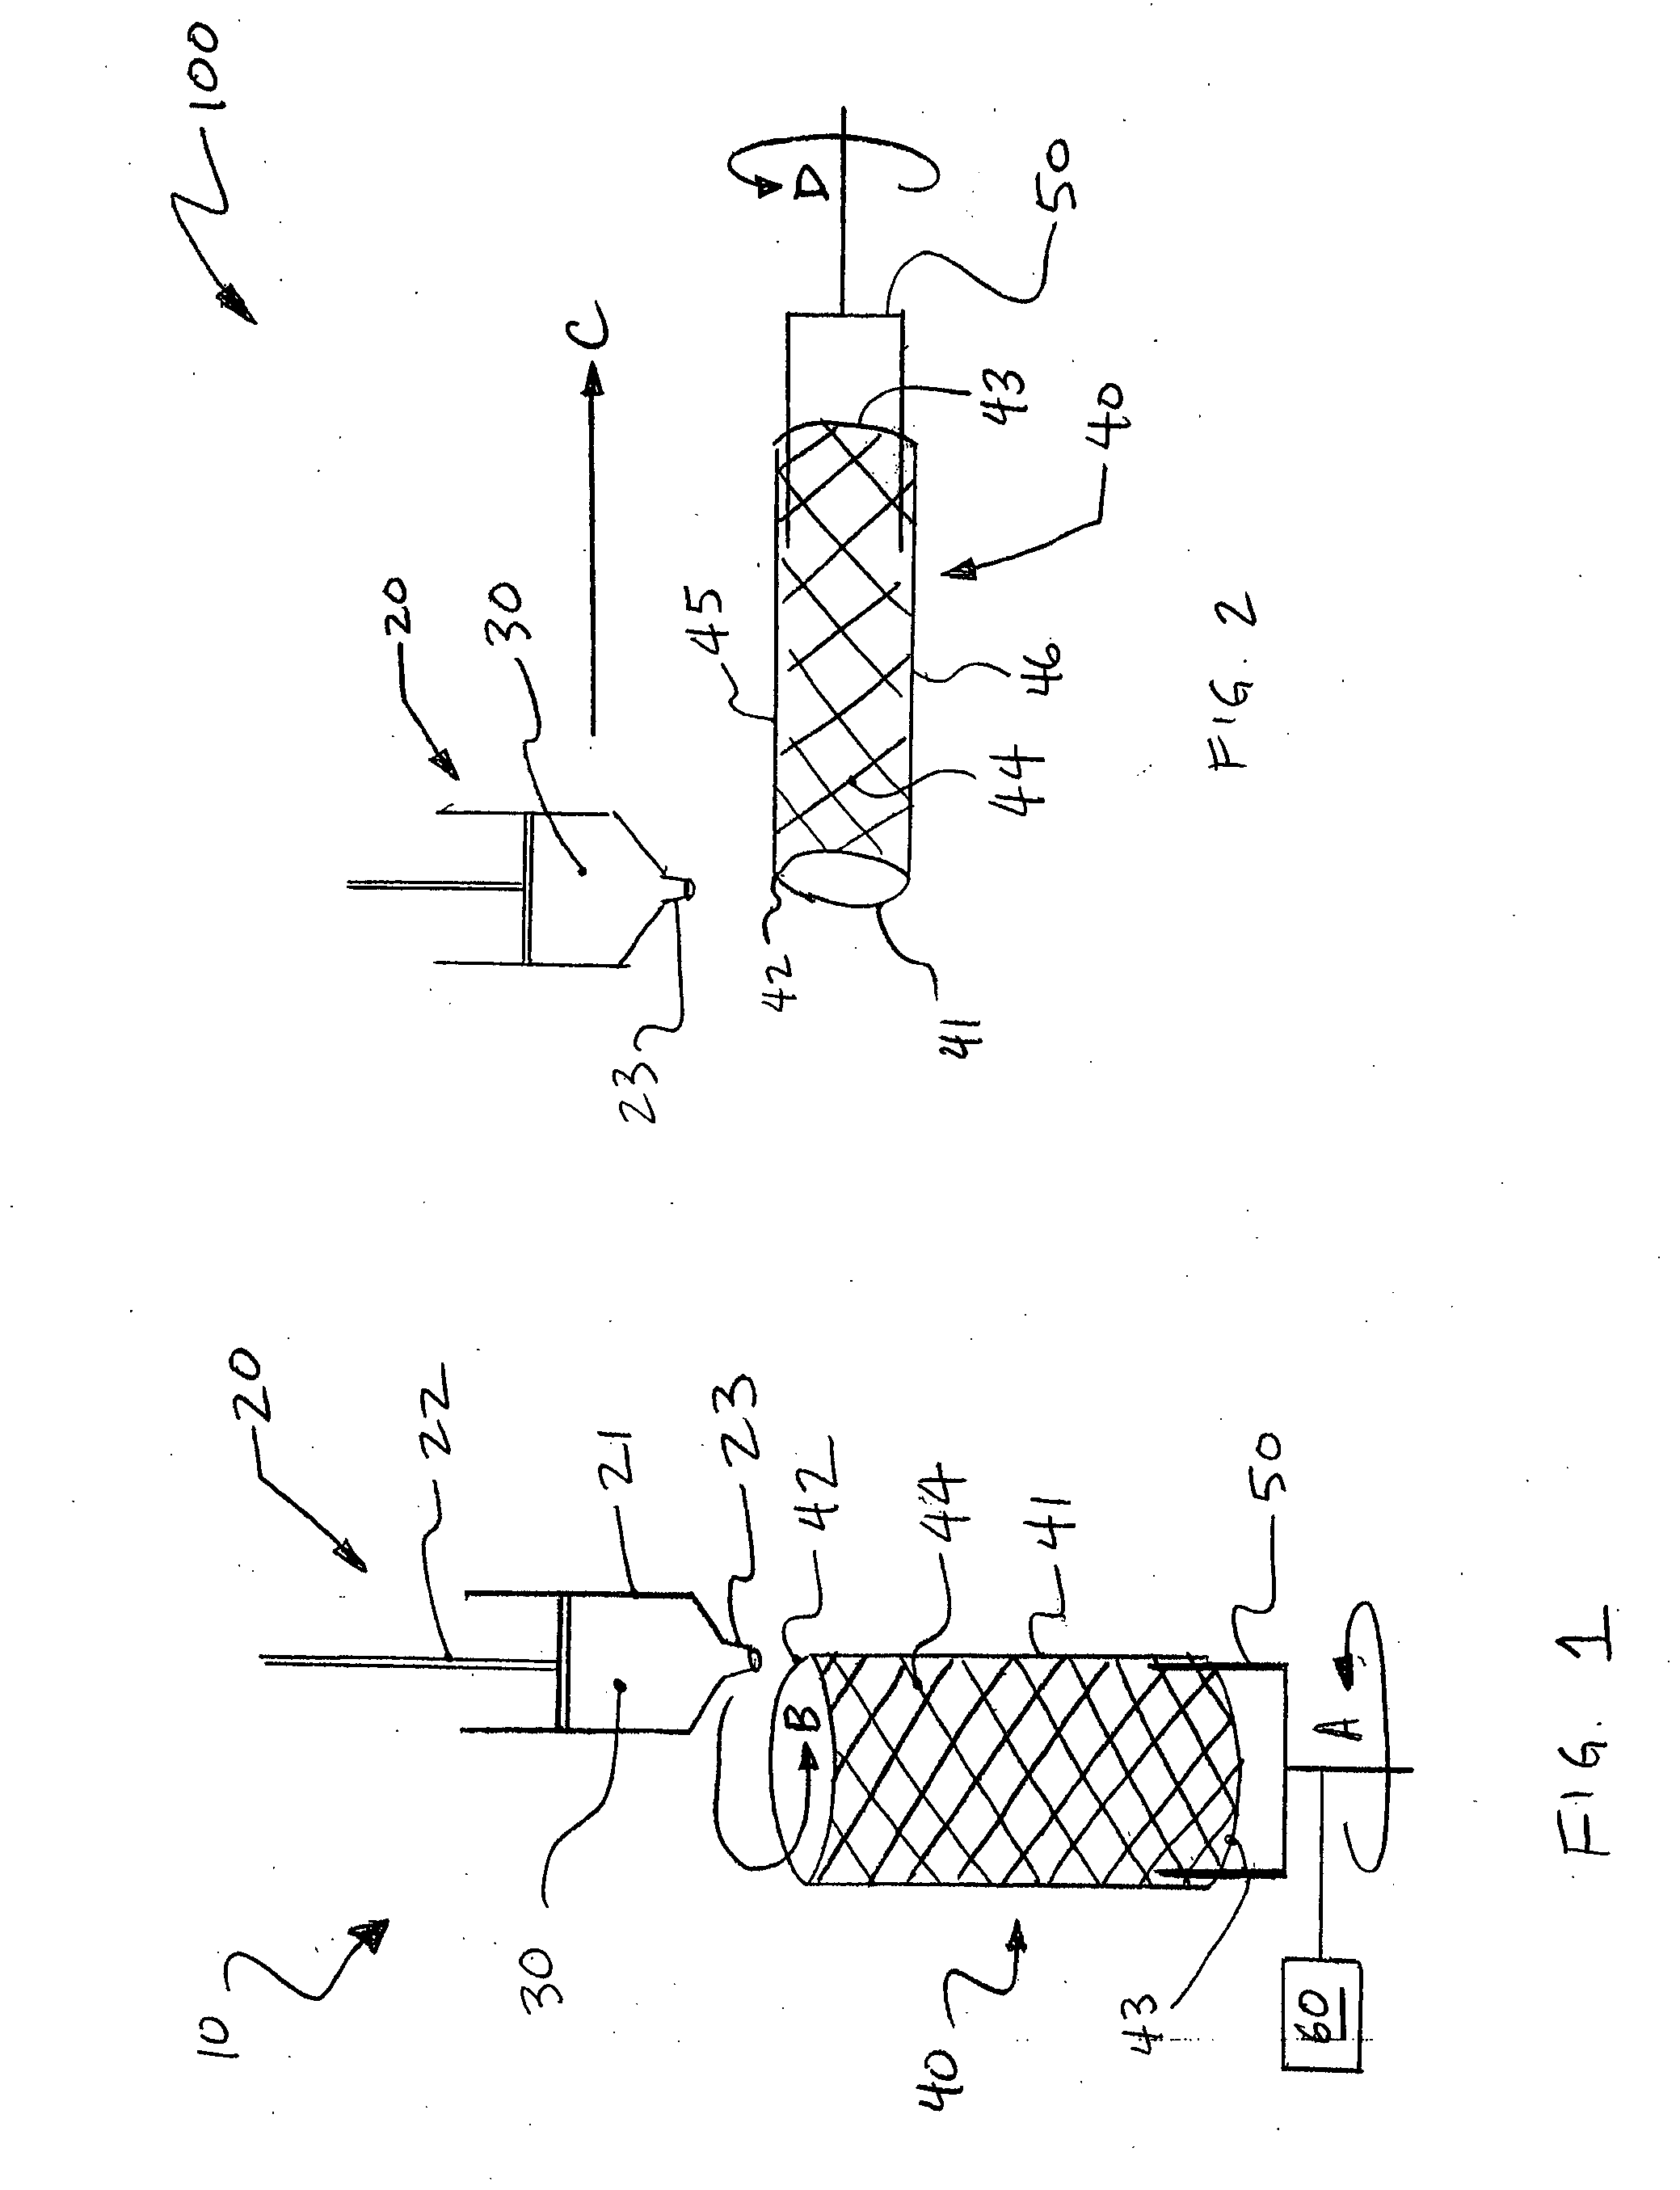 Methods and apparatus for injection coating a medical device